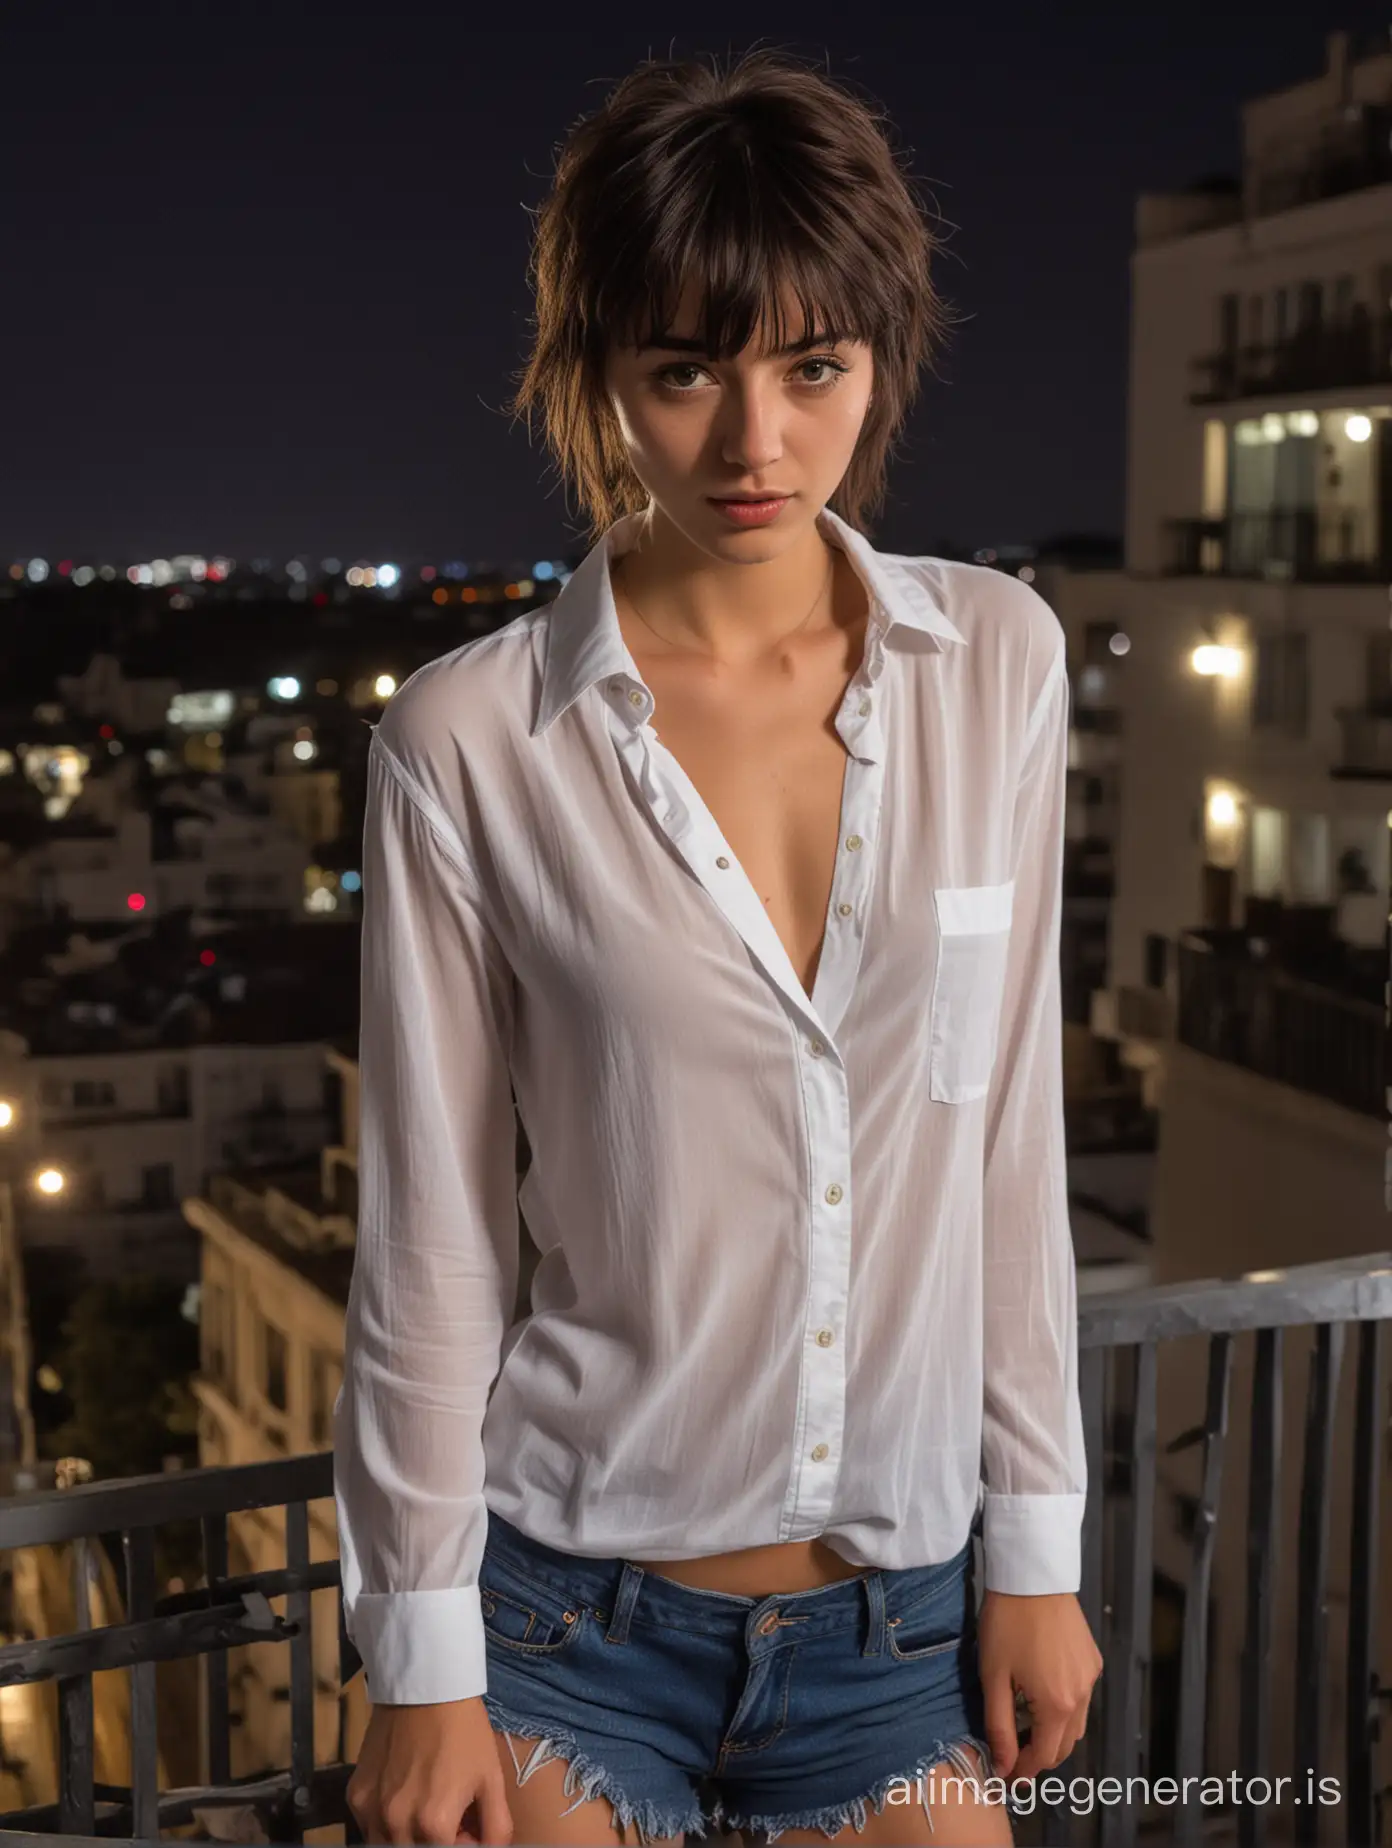 Sensual-Night-Portrait-Young-Woman-in-Unbuttoned-Shirt-on-Balcony